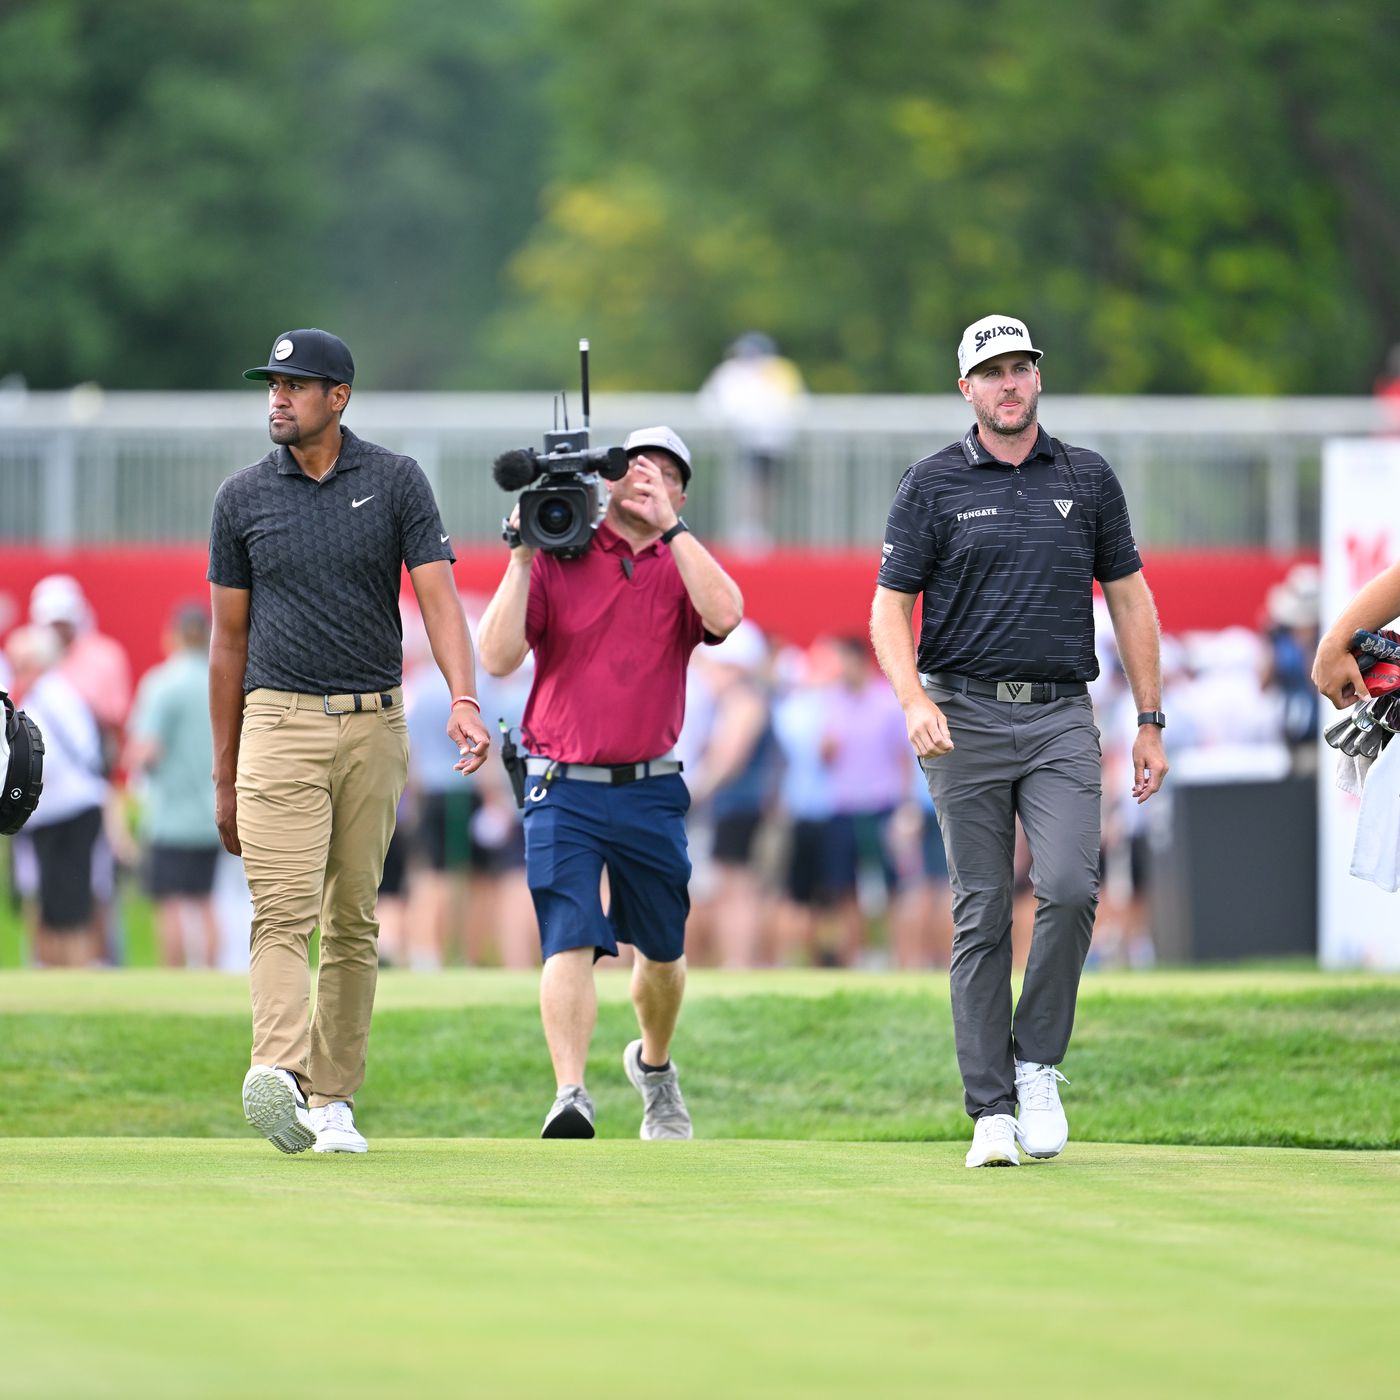 Rocket Mortgage Classic prize money 2022: How much is purse breakdown for  winning golfer, every other player - DraftKings Network